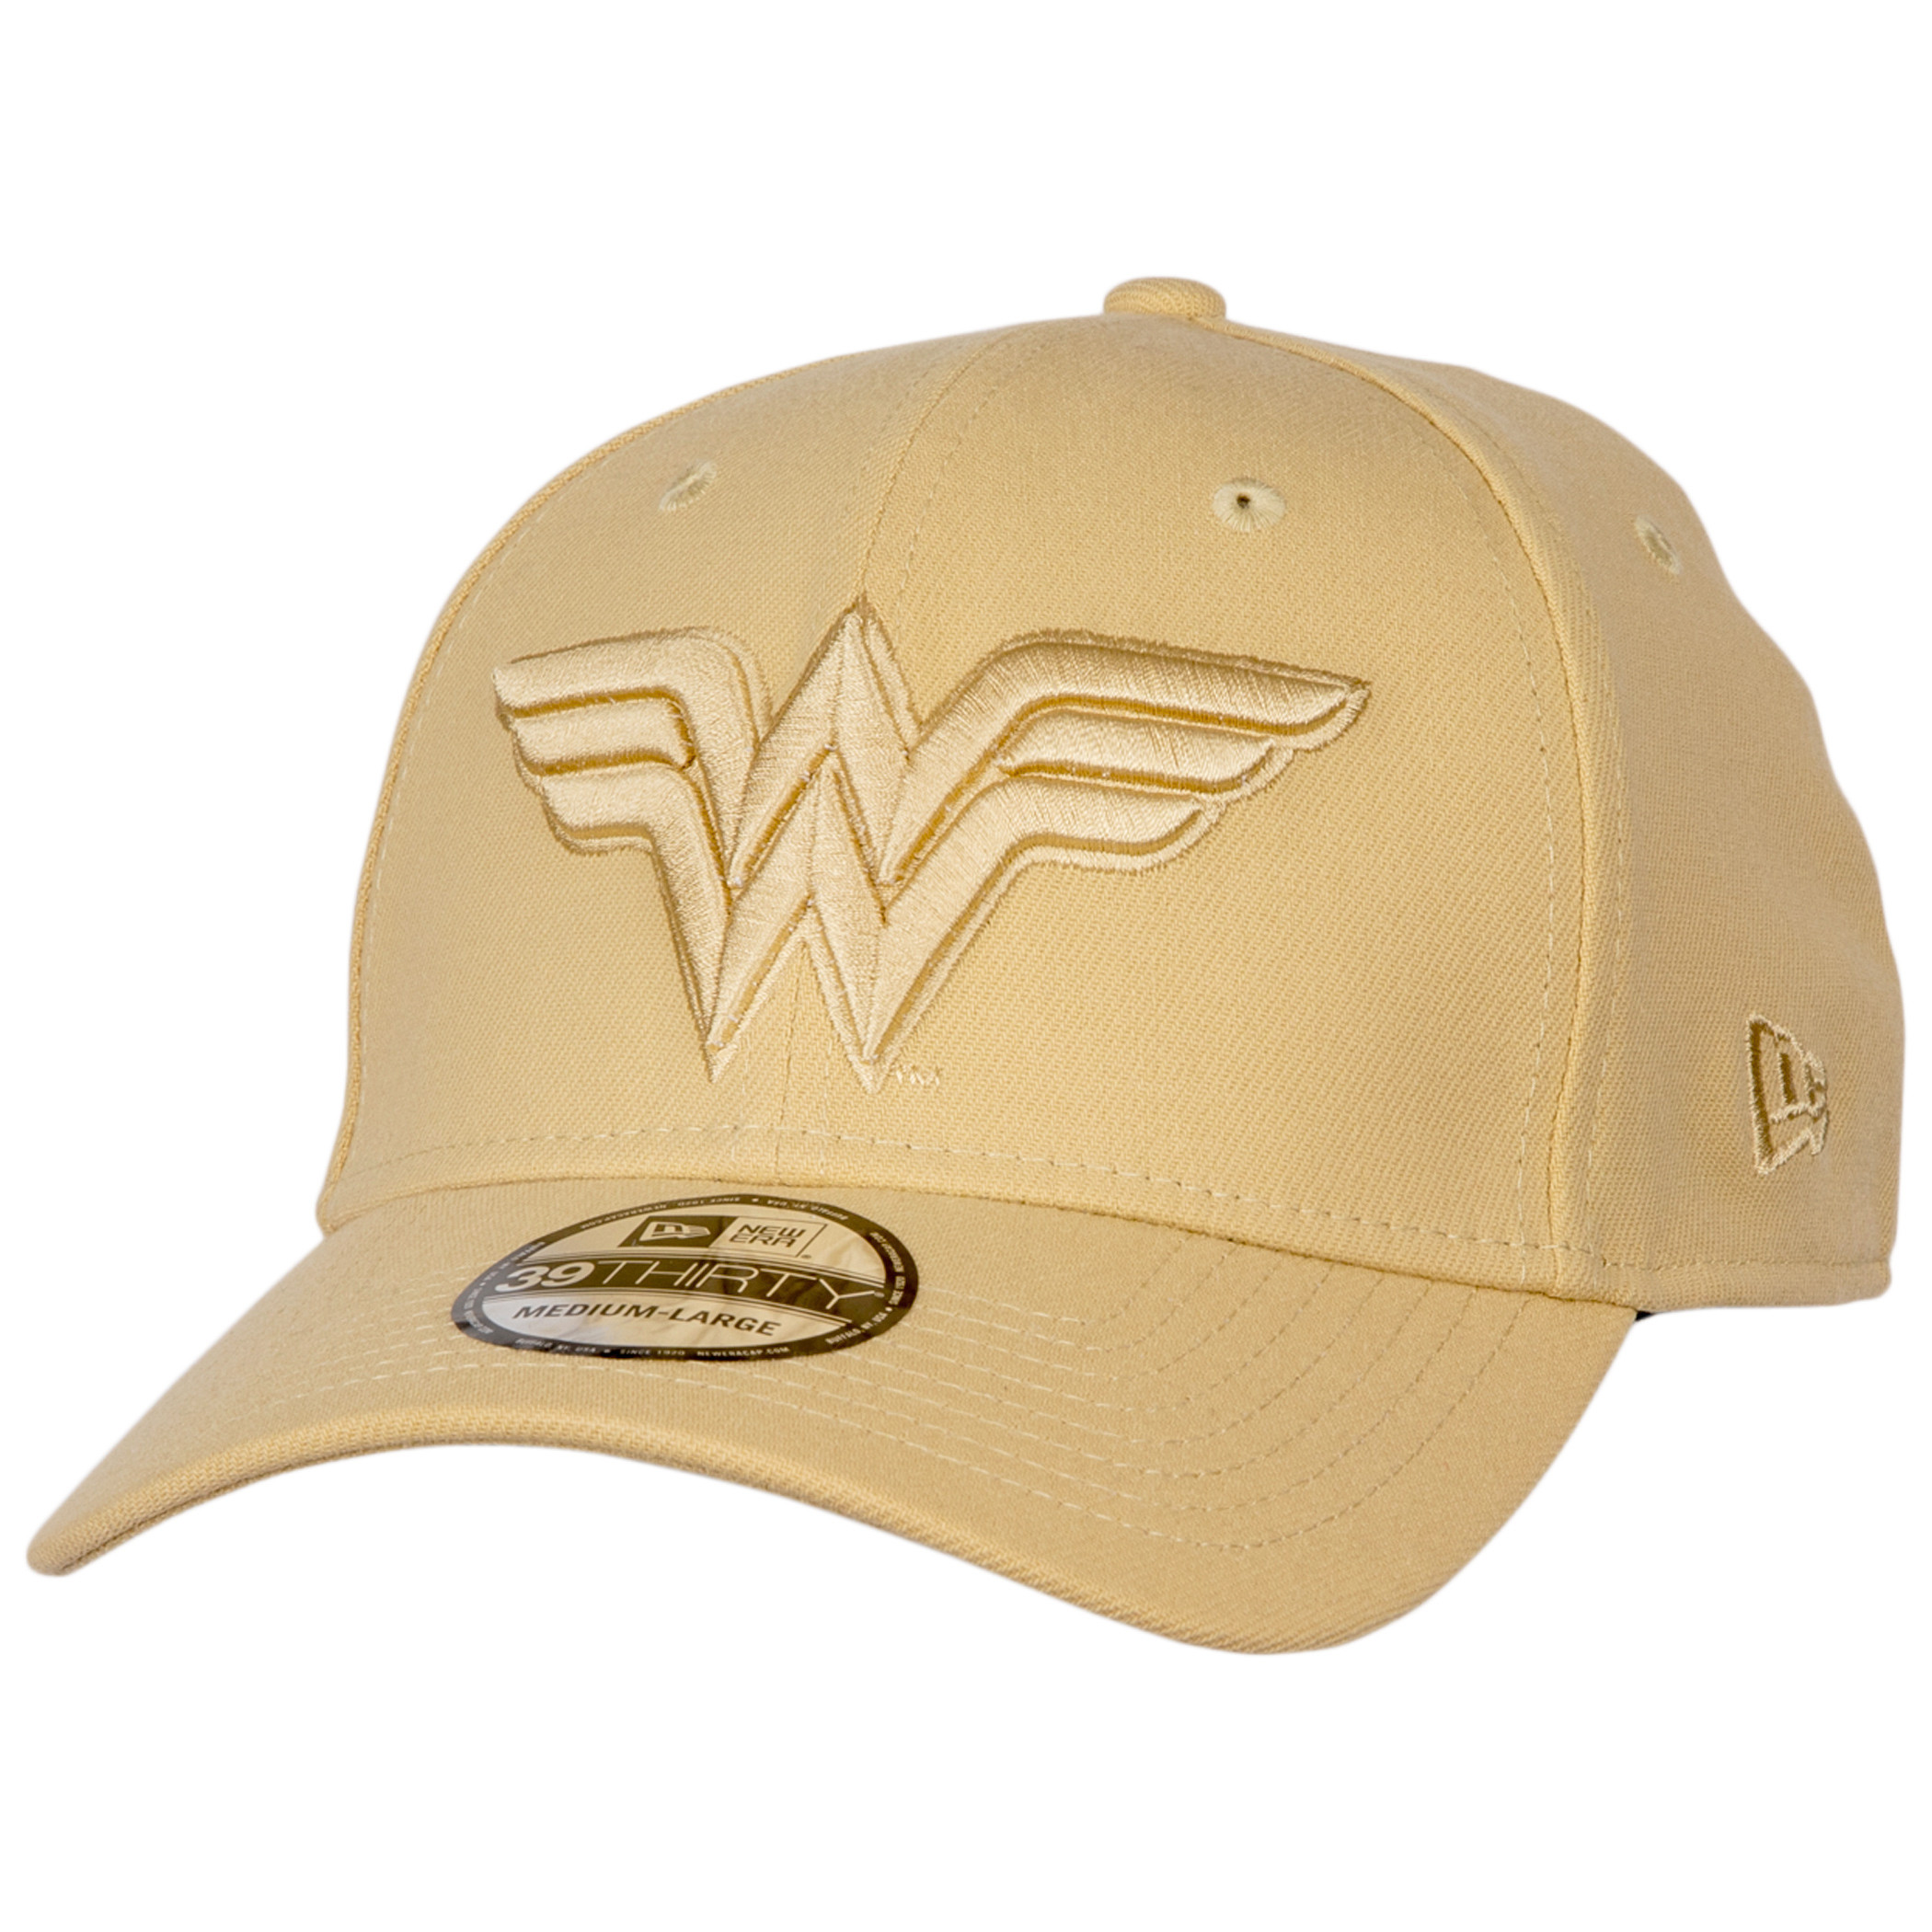 Wonder Woman 1984 Movie Gold Symbol on Gold Armor New Era 39Thirty Fitted Hat